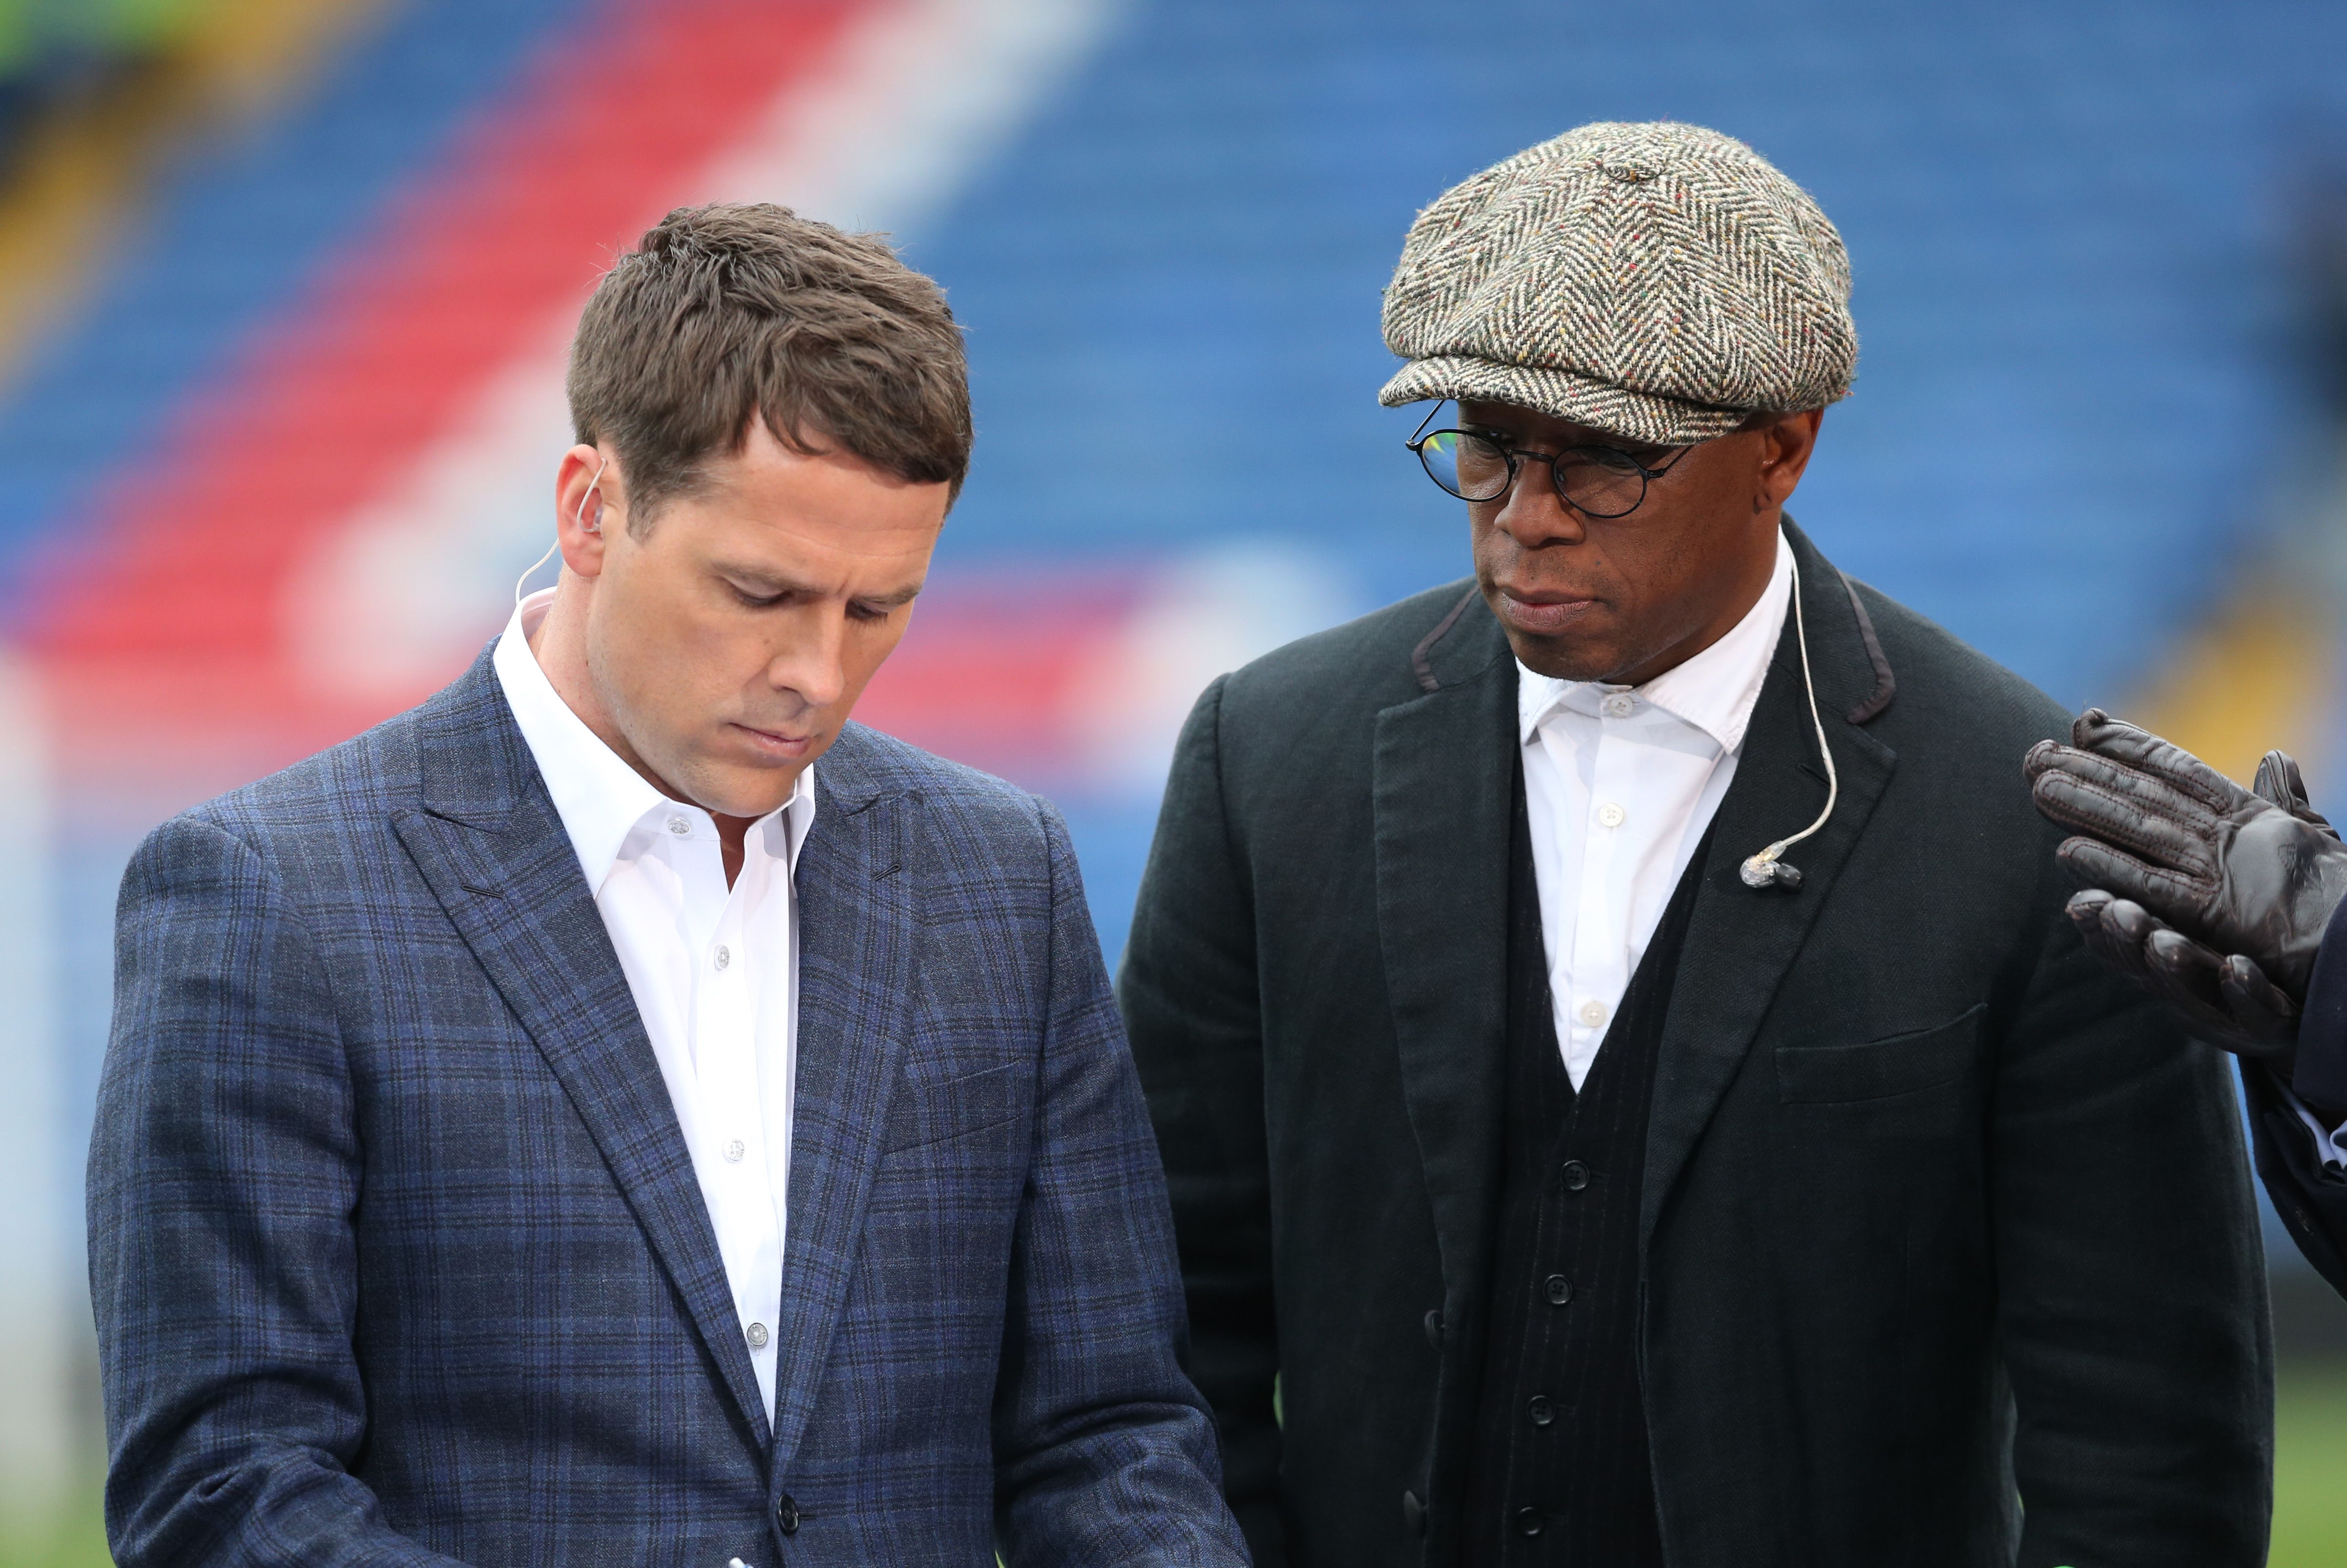 Ian Wright savaged Michael Owen and Chris Sutton in 2017